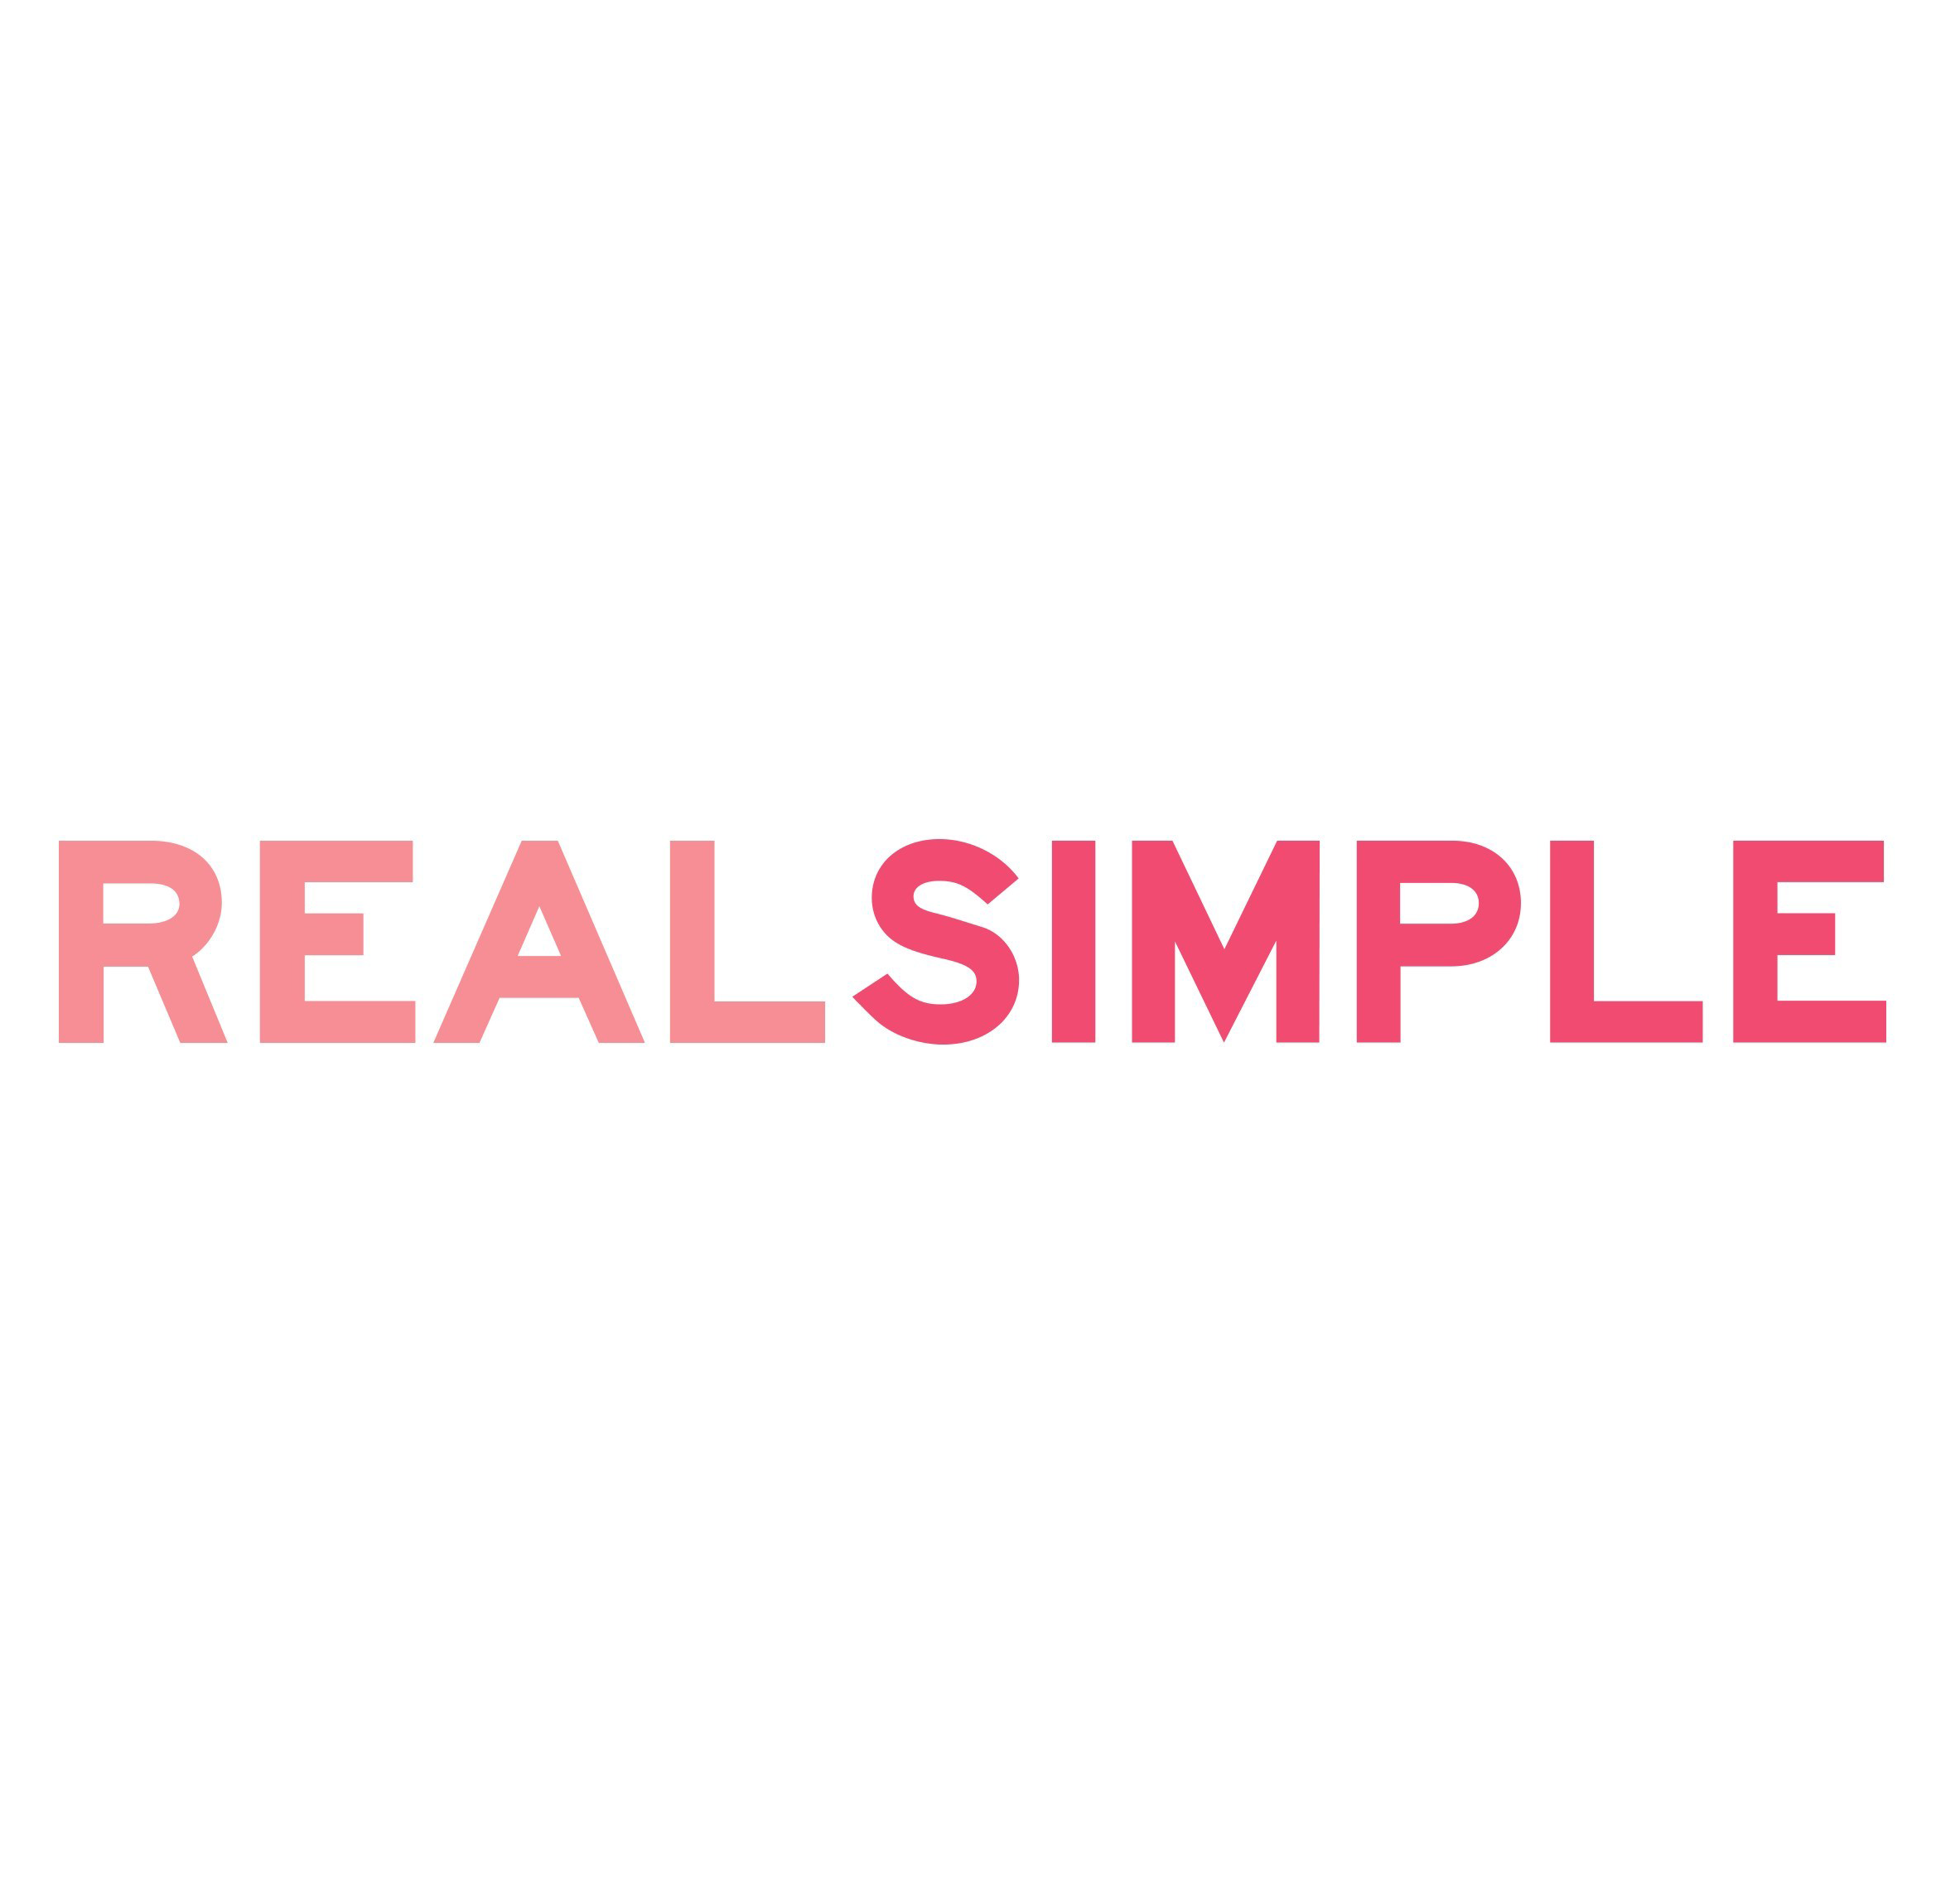 Real Simple Logo.png